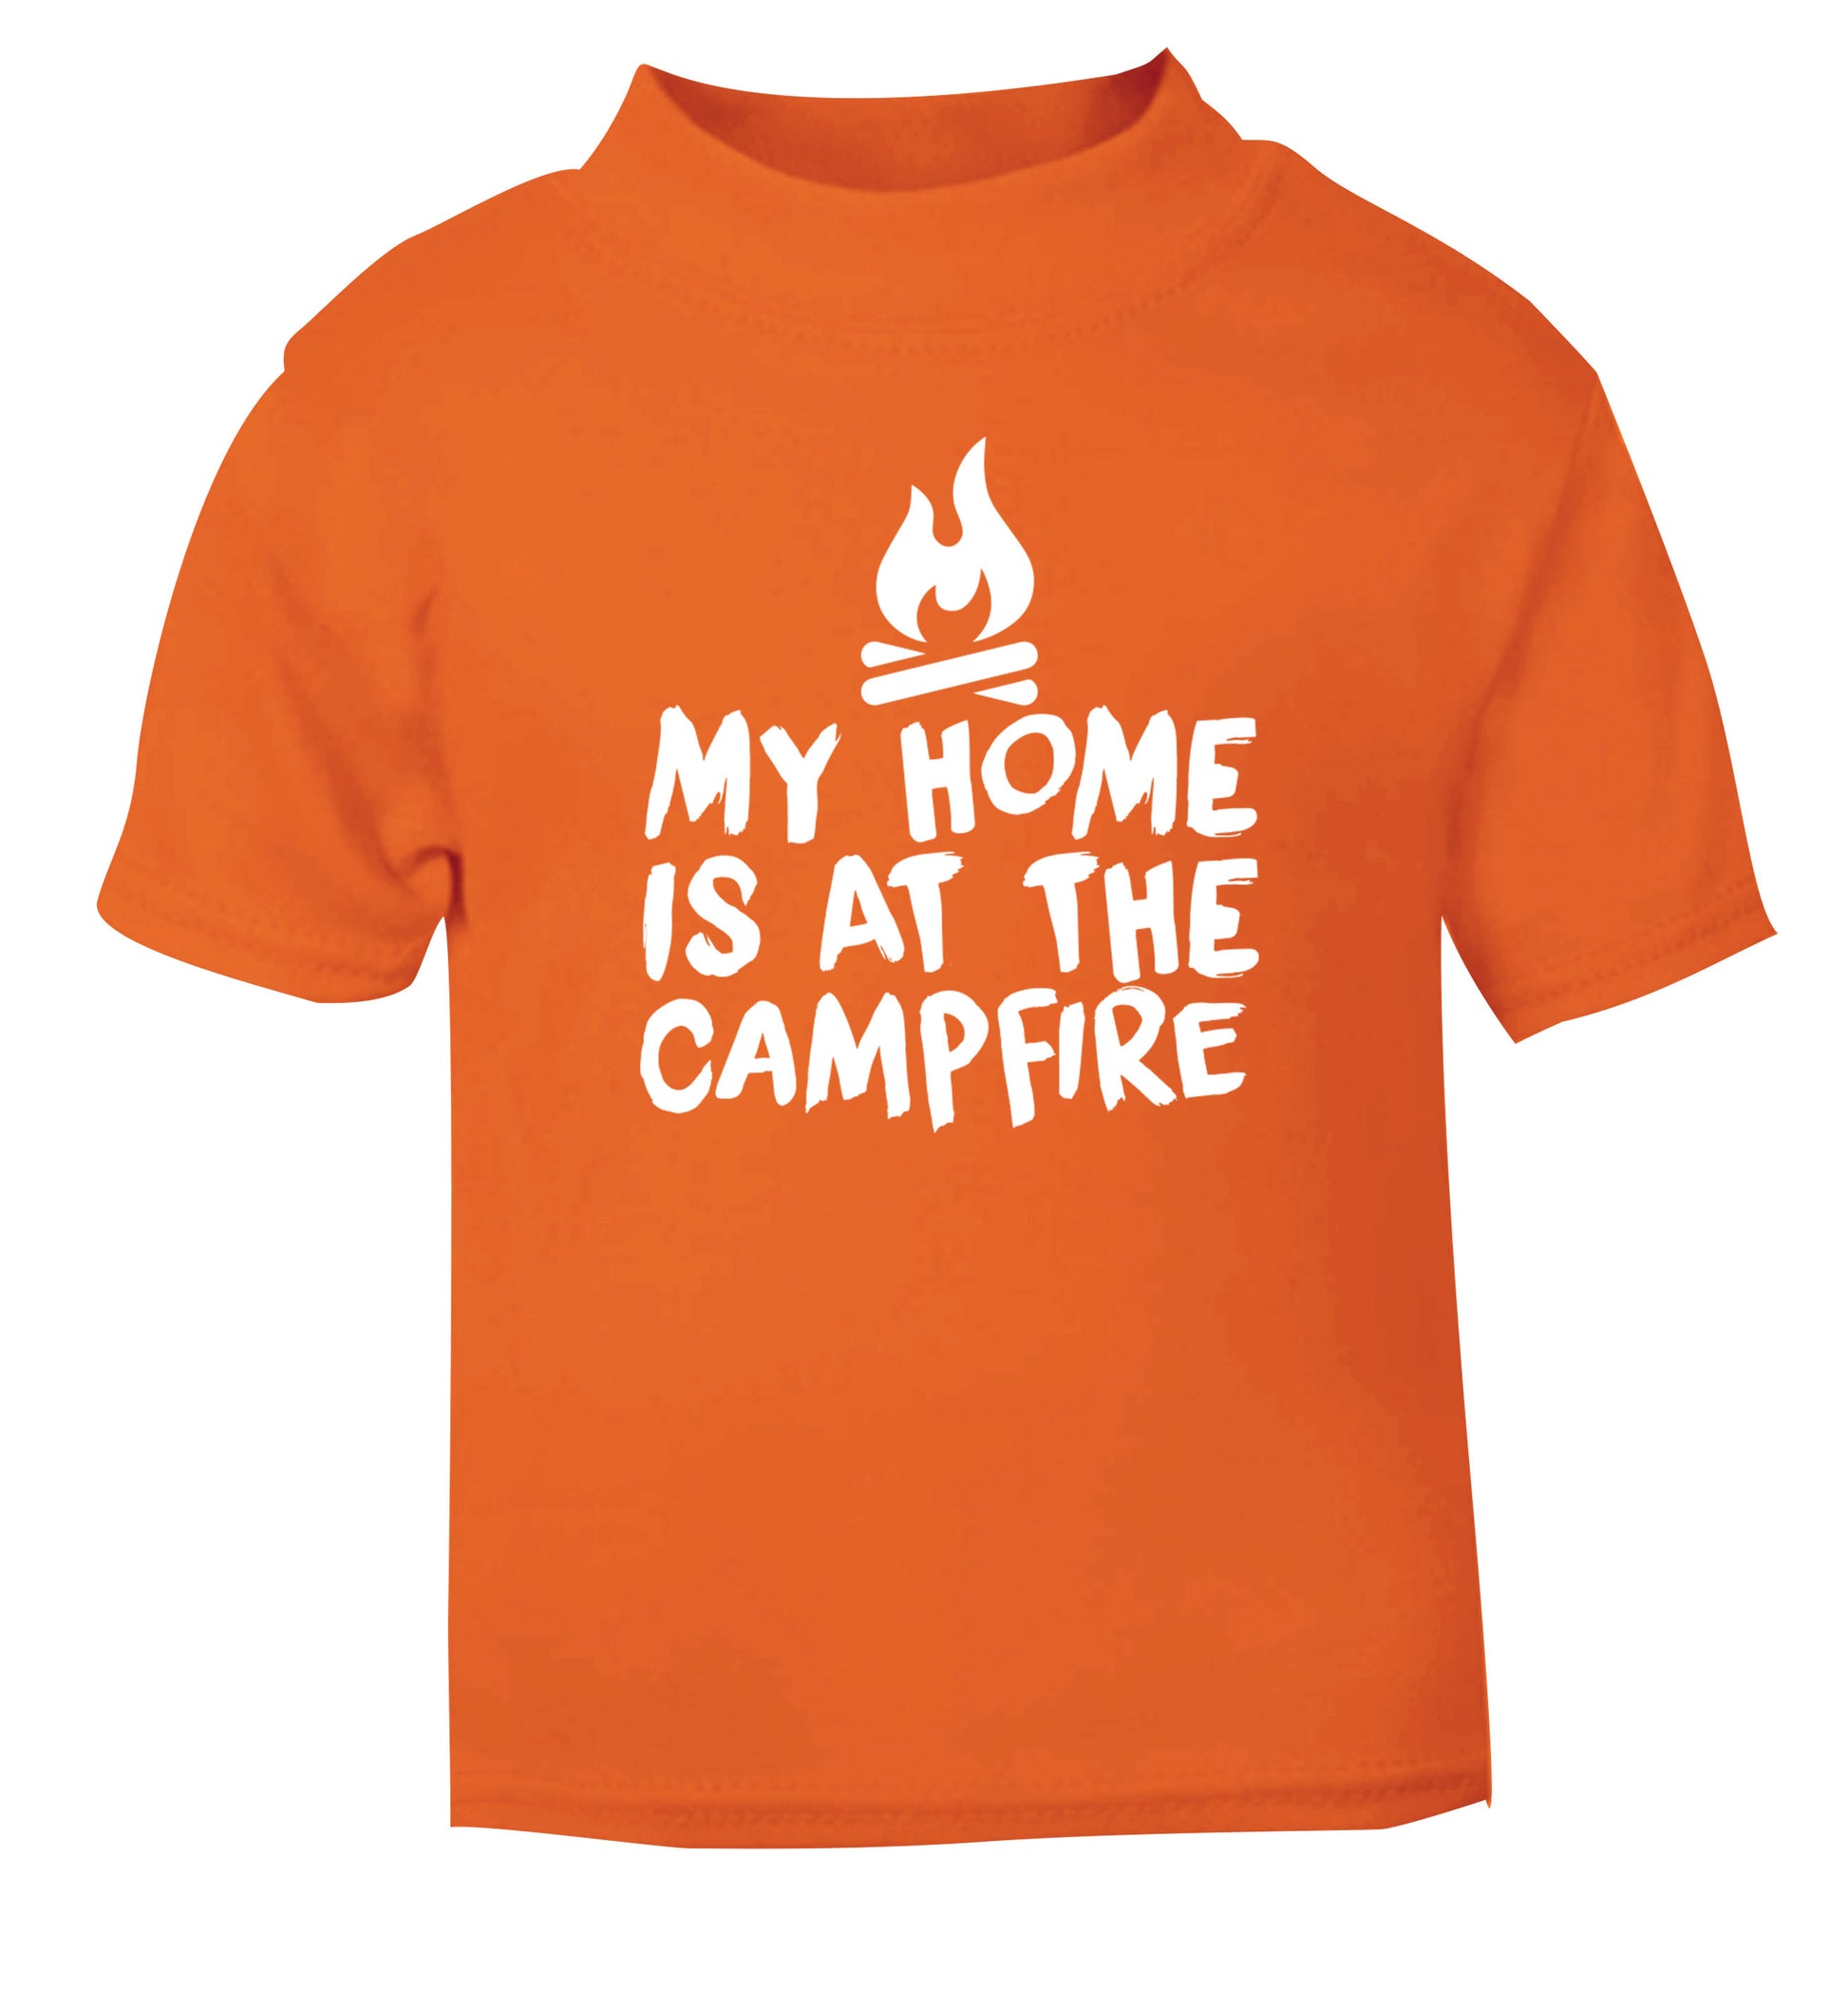 My home is at the campfire orange Baby Toddler Tshirt 2 Years